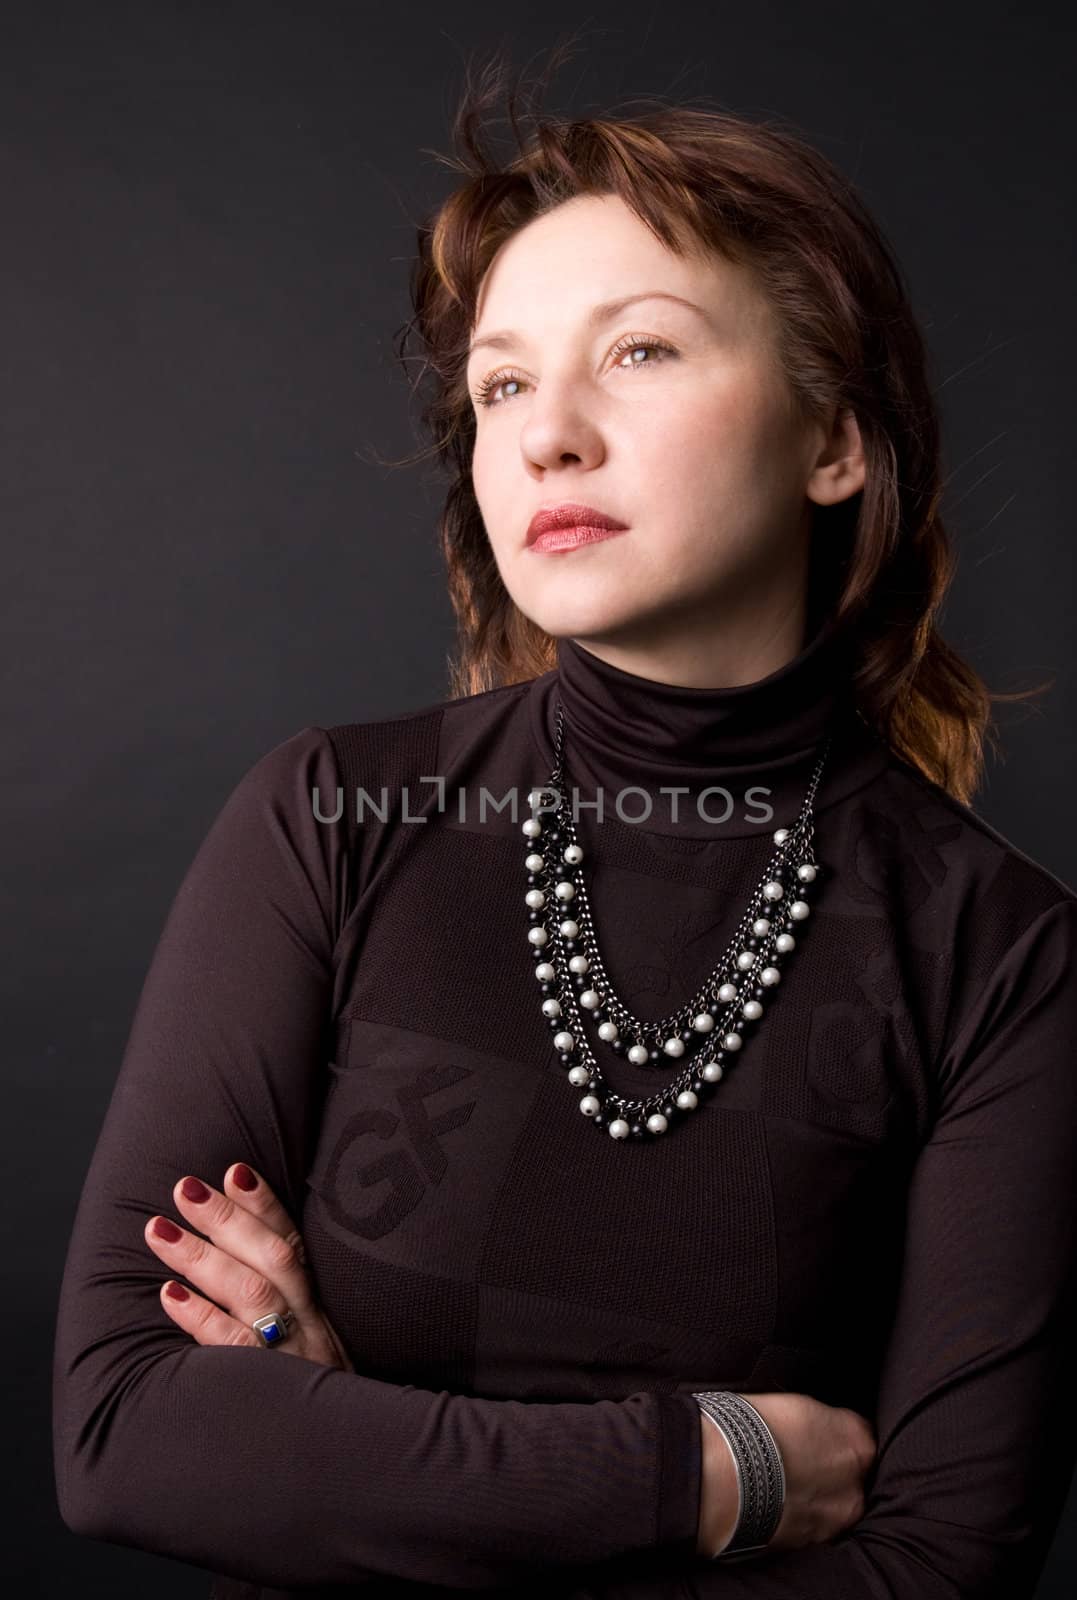 Portrait of the woman in studio on a black background.